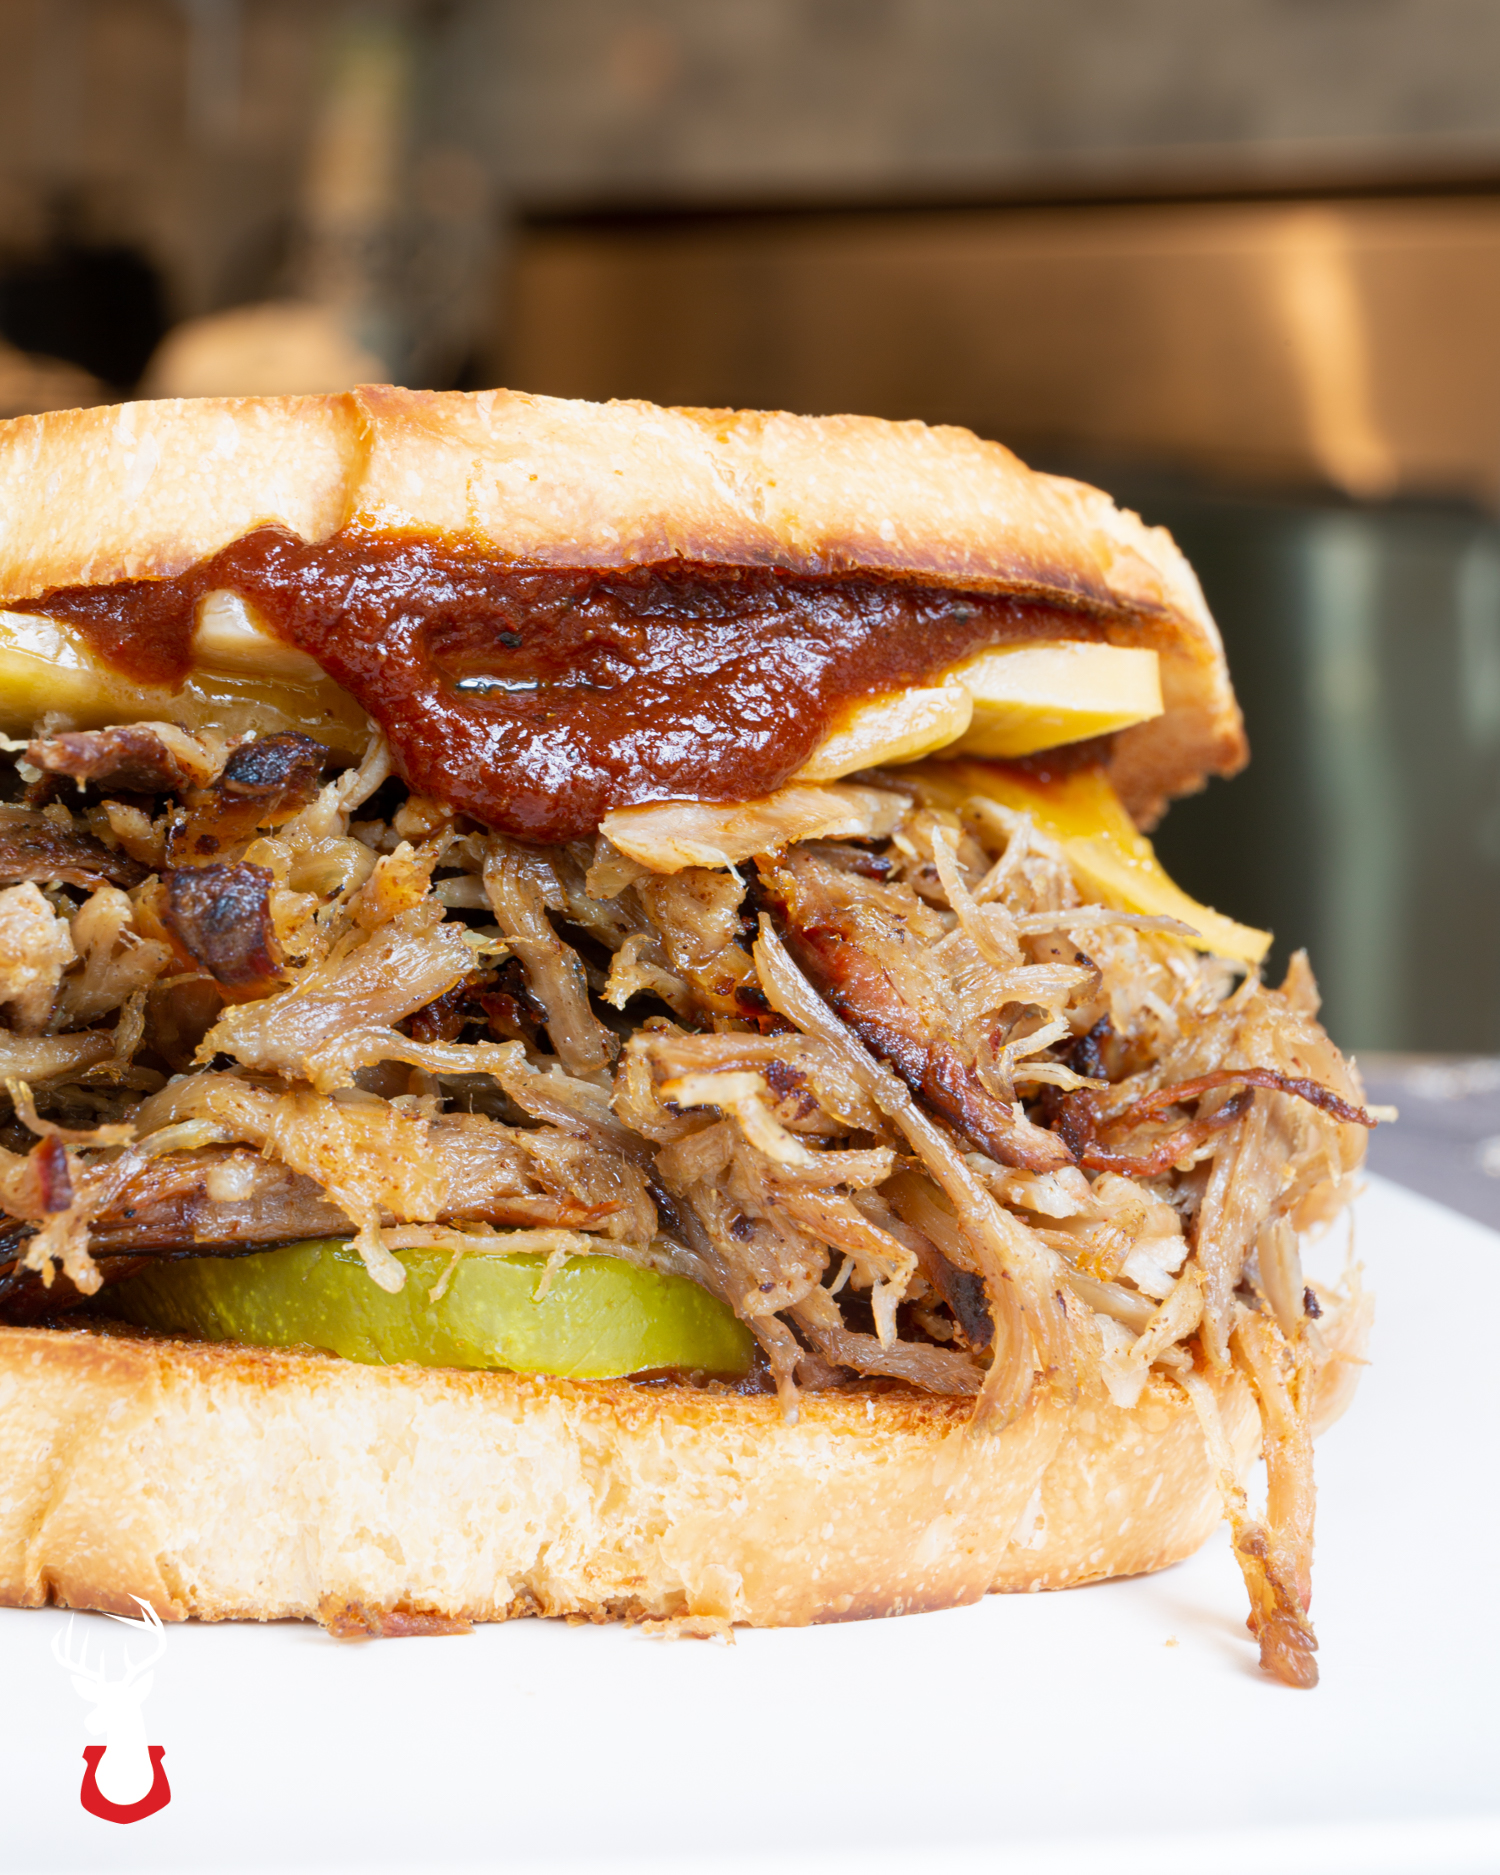 The traditional pulled pork BBQ sandwich is delicious.